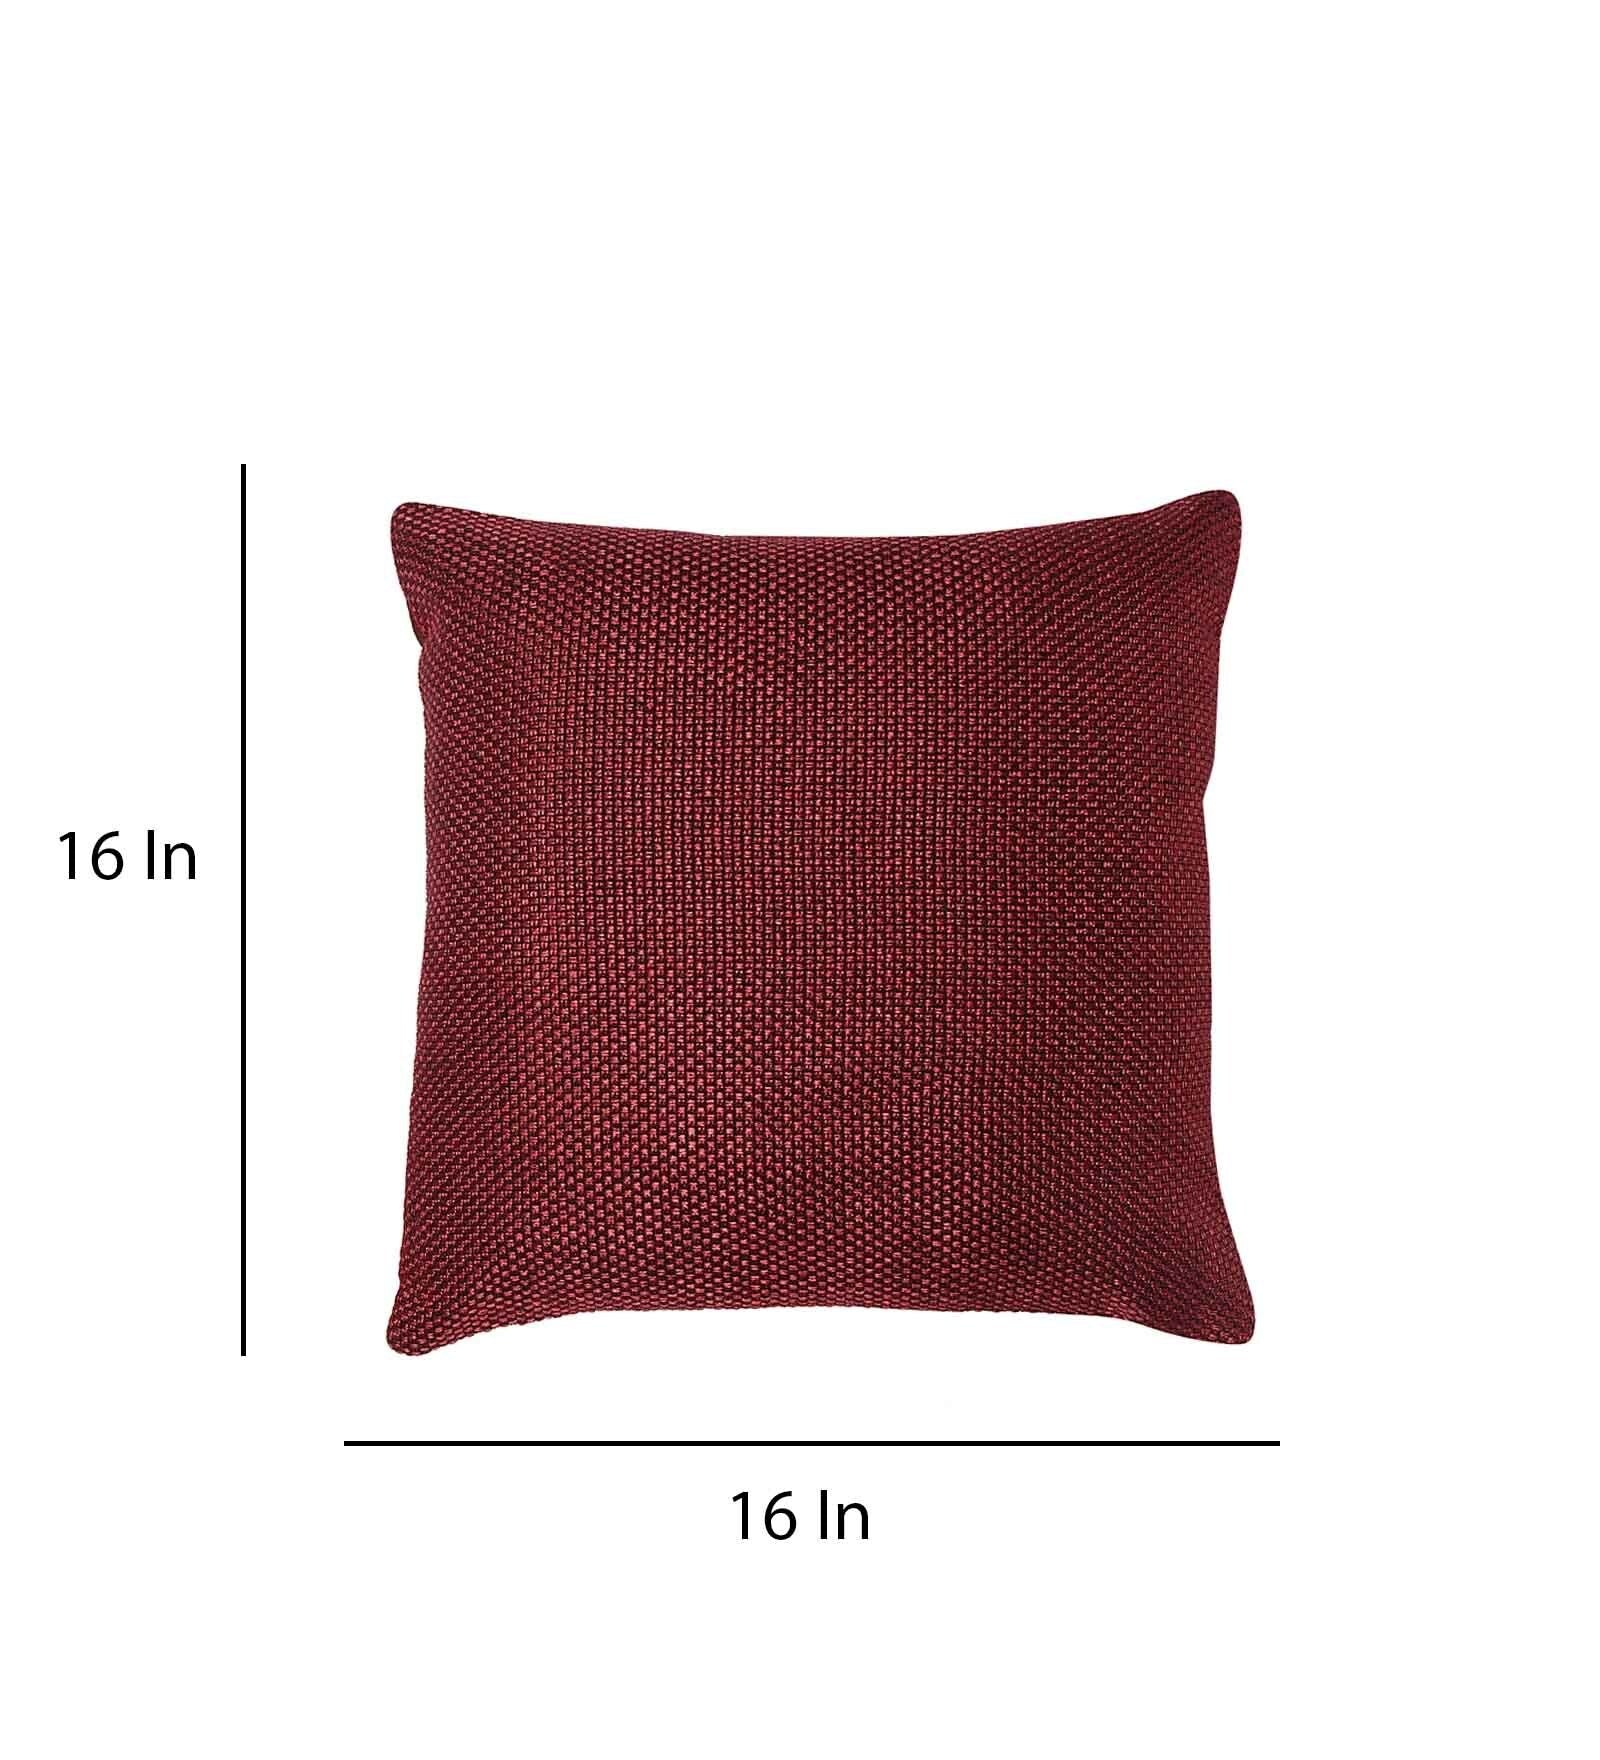 Vedi Jute Fabric Geometric 16x16 inches Cushion + Covers (Set of 5) In Blaze Red Colour